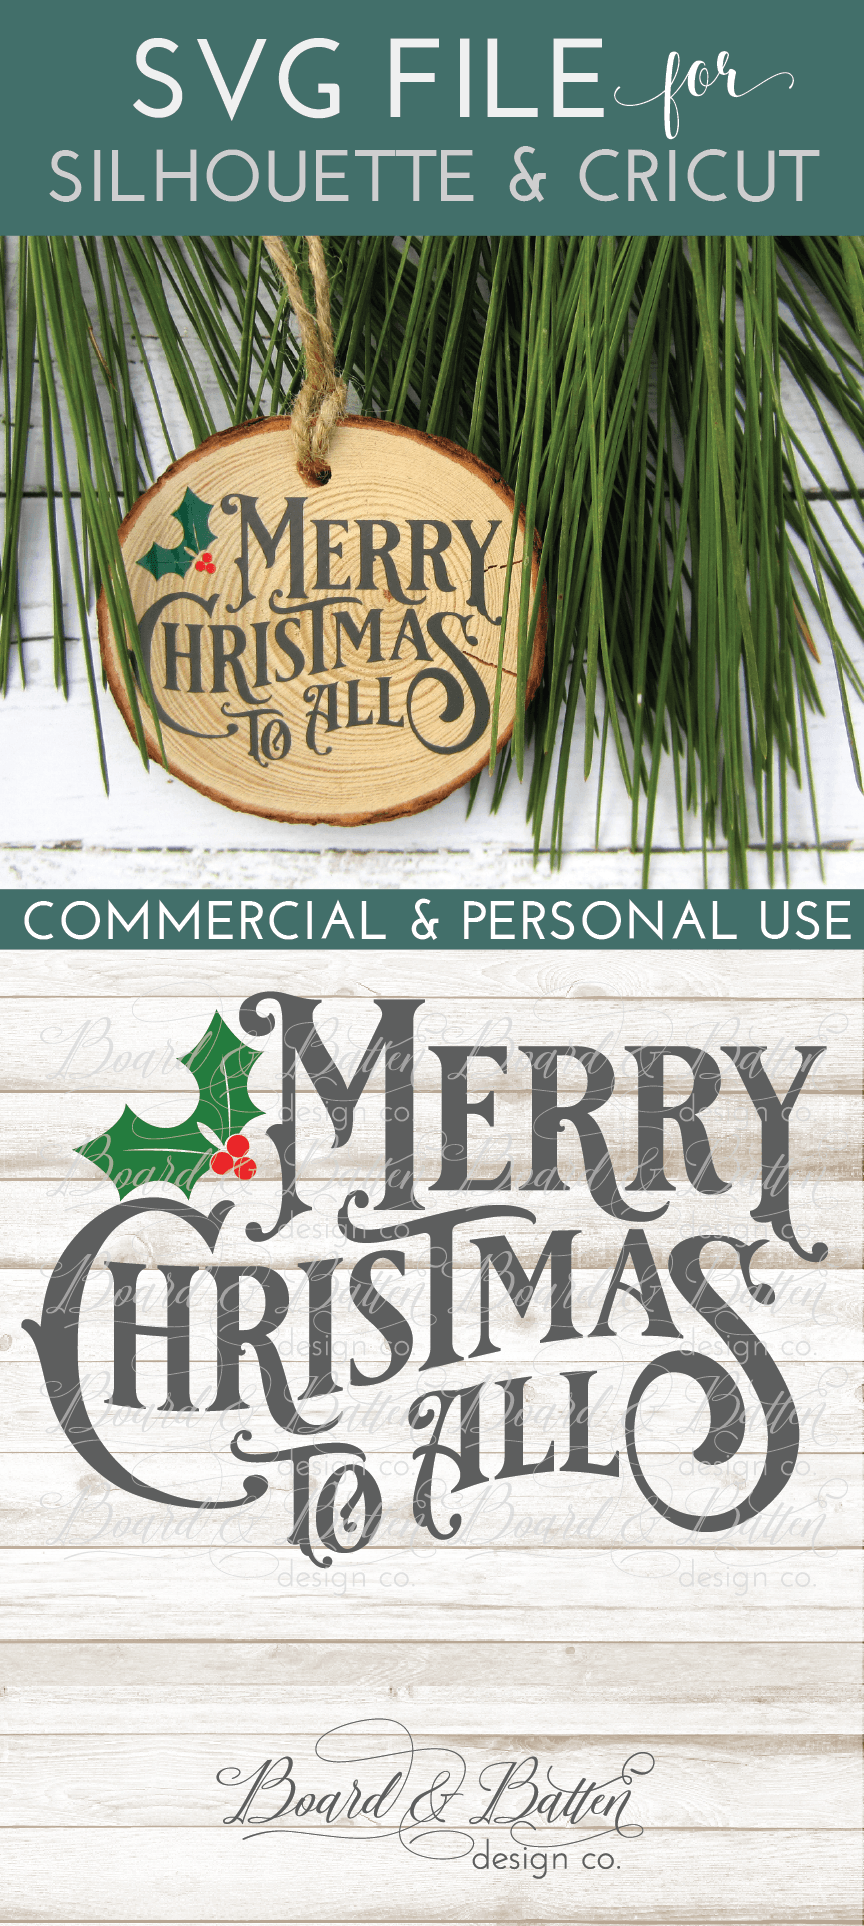 Download Merry Christmas to All Vintage Christmas SVG File - Board & Batten Design Co.